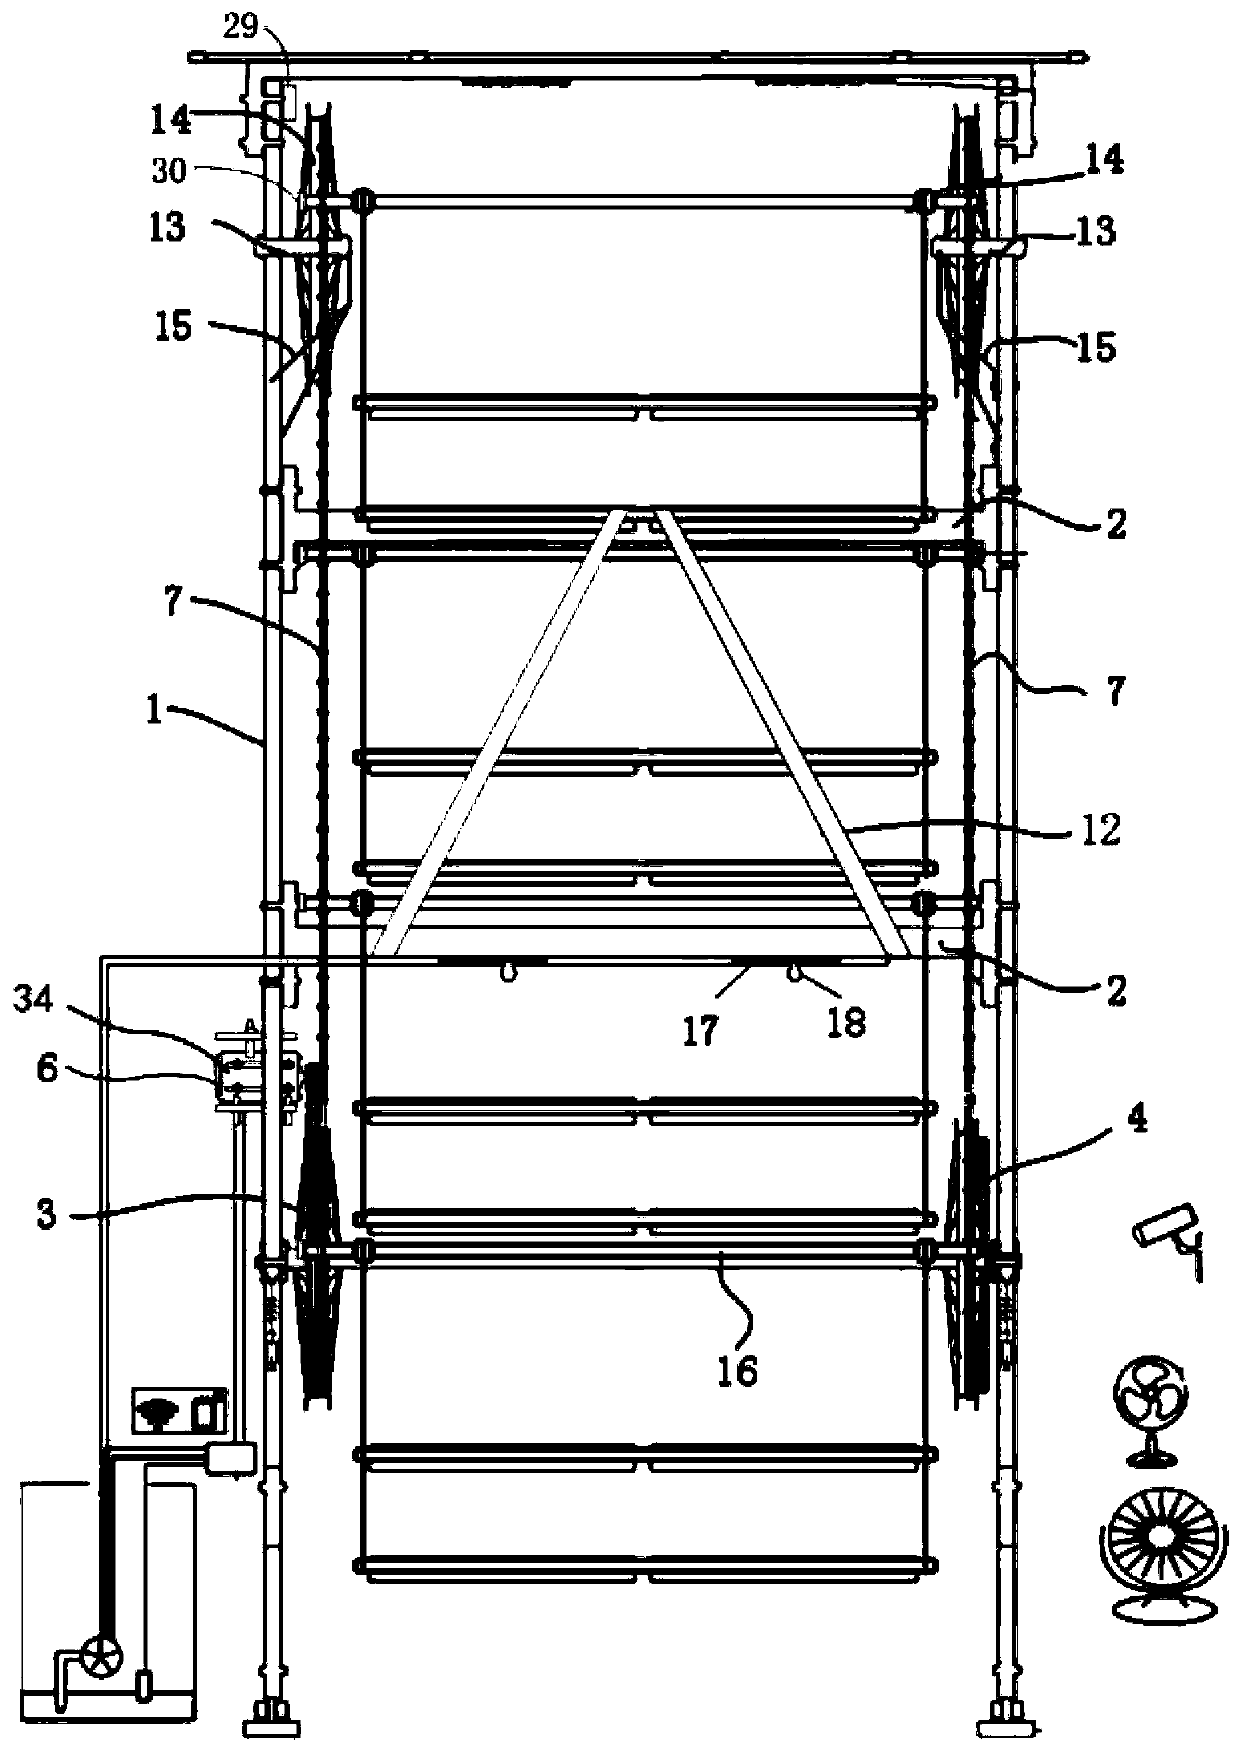 Vertical planting device and system